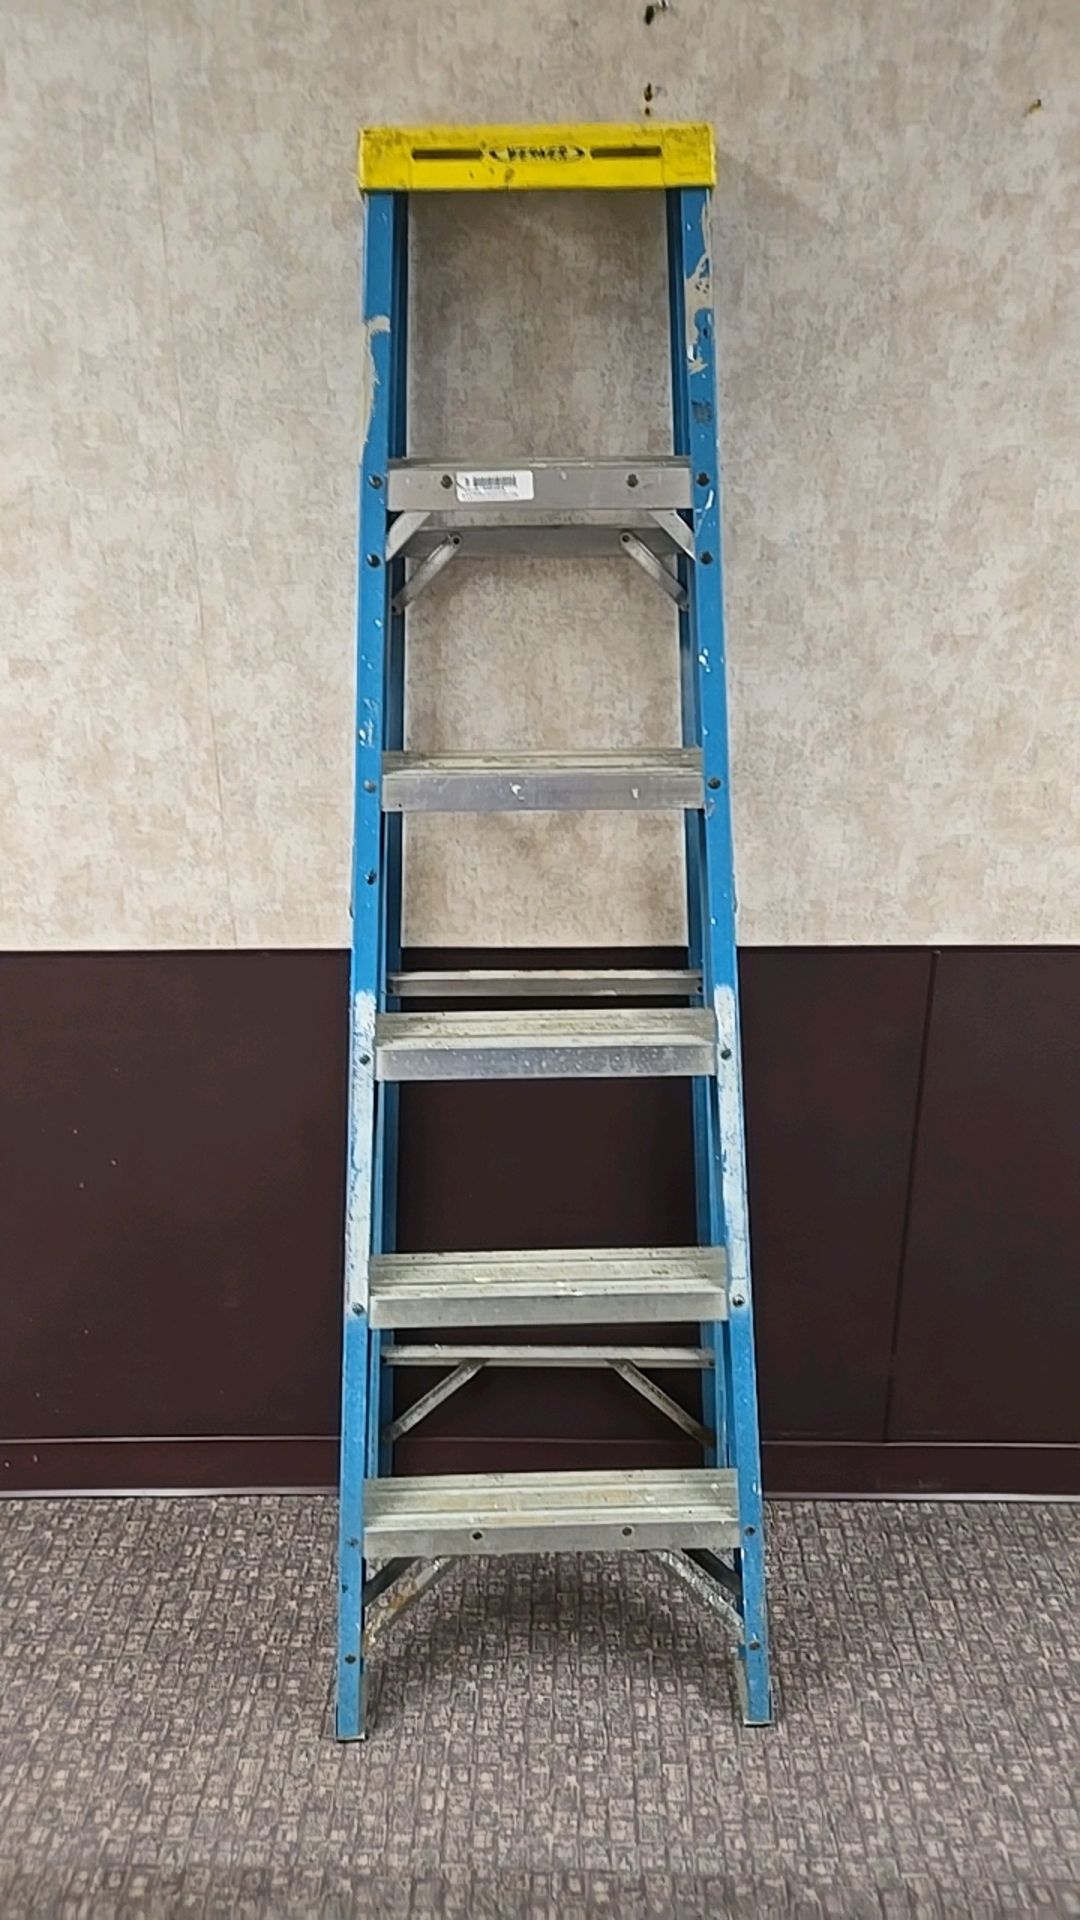 WERNER 6006 6' LADDER, TYPE 1 RATING, 250LBS - Image 3 of 3